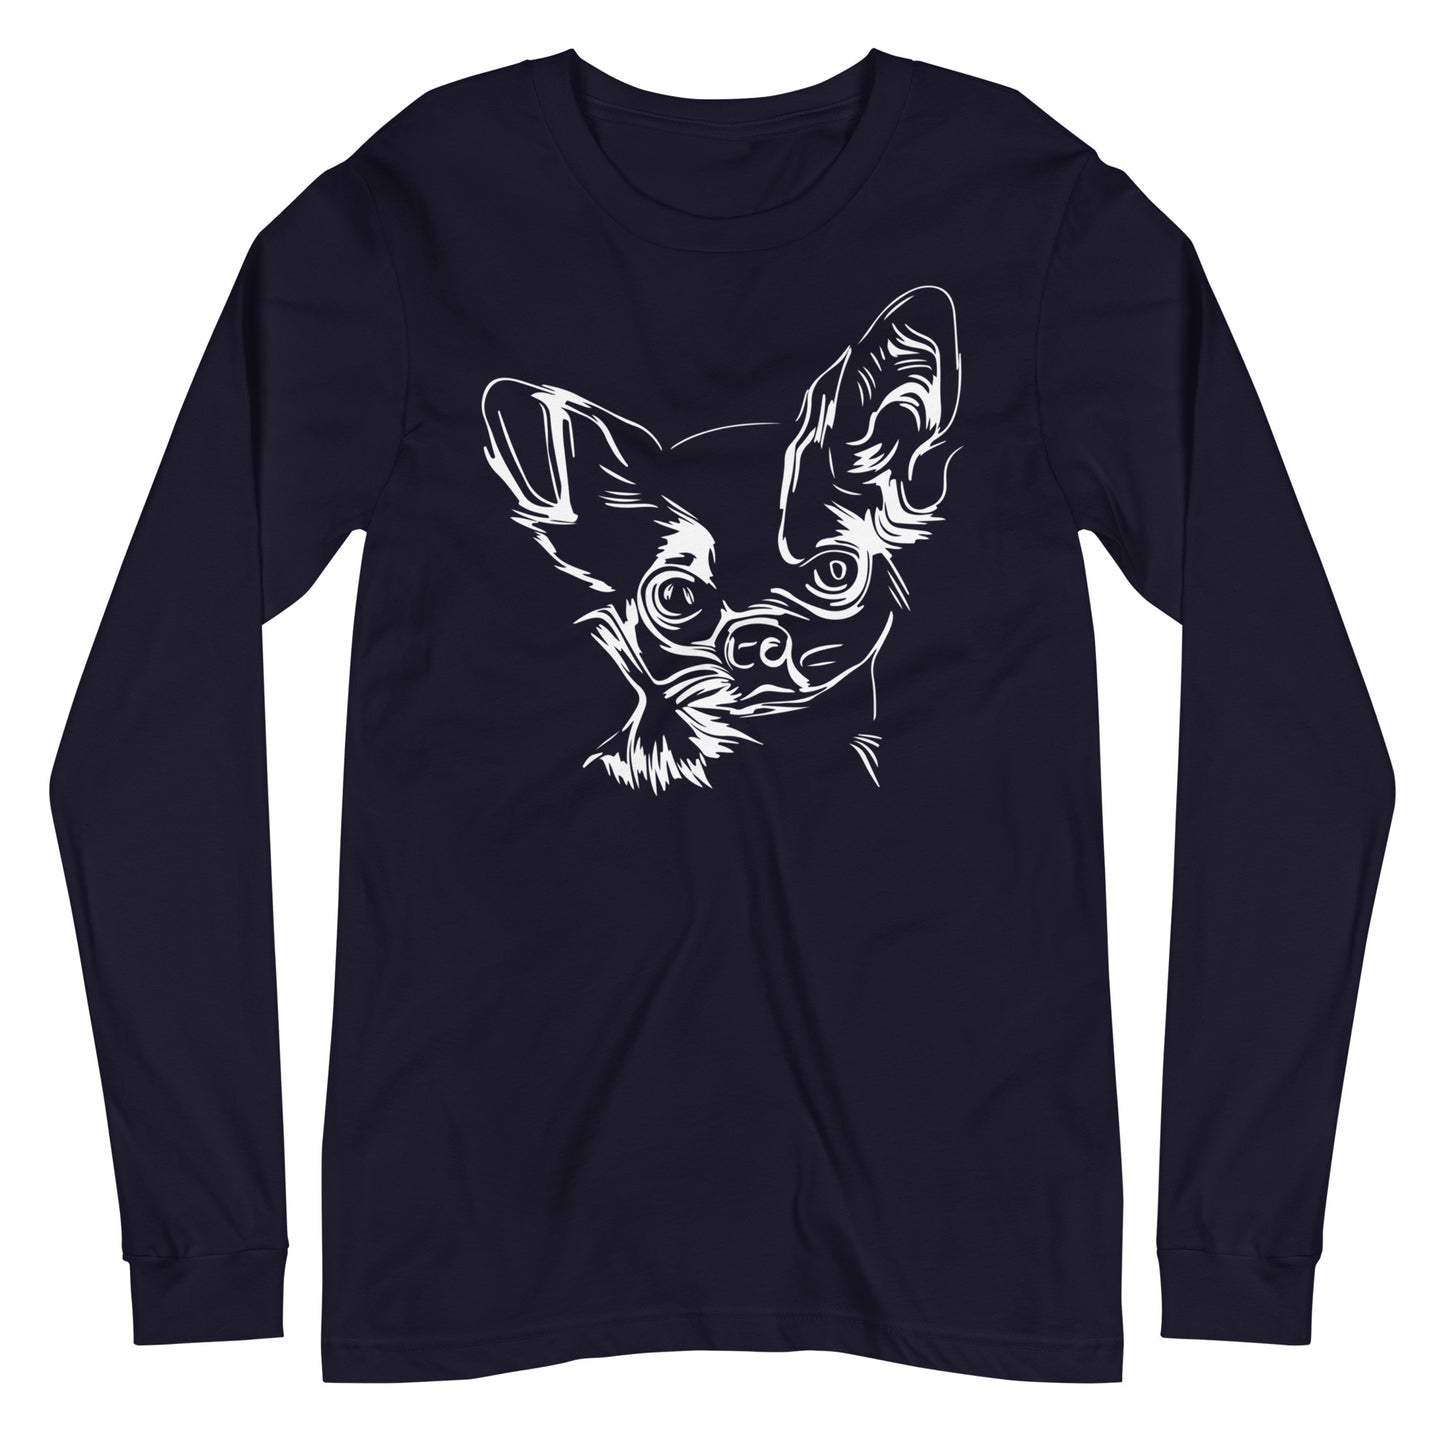 White line Chihuahua face on unisex navy long sleeve t-shirt